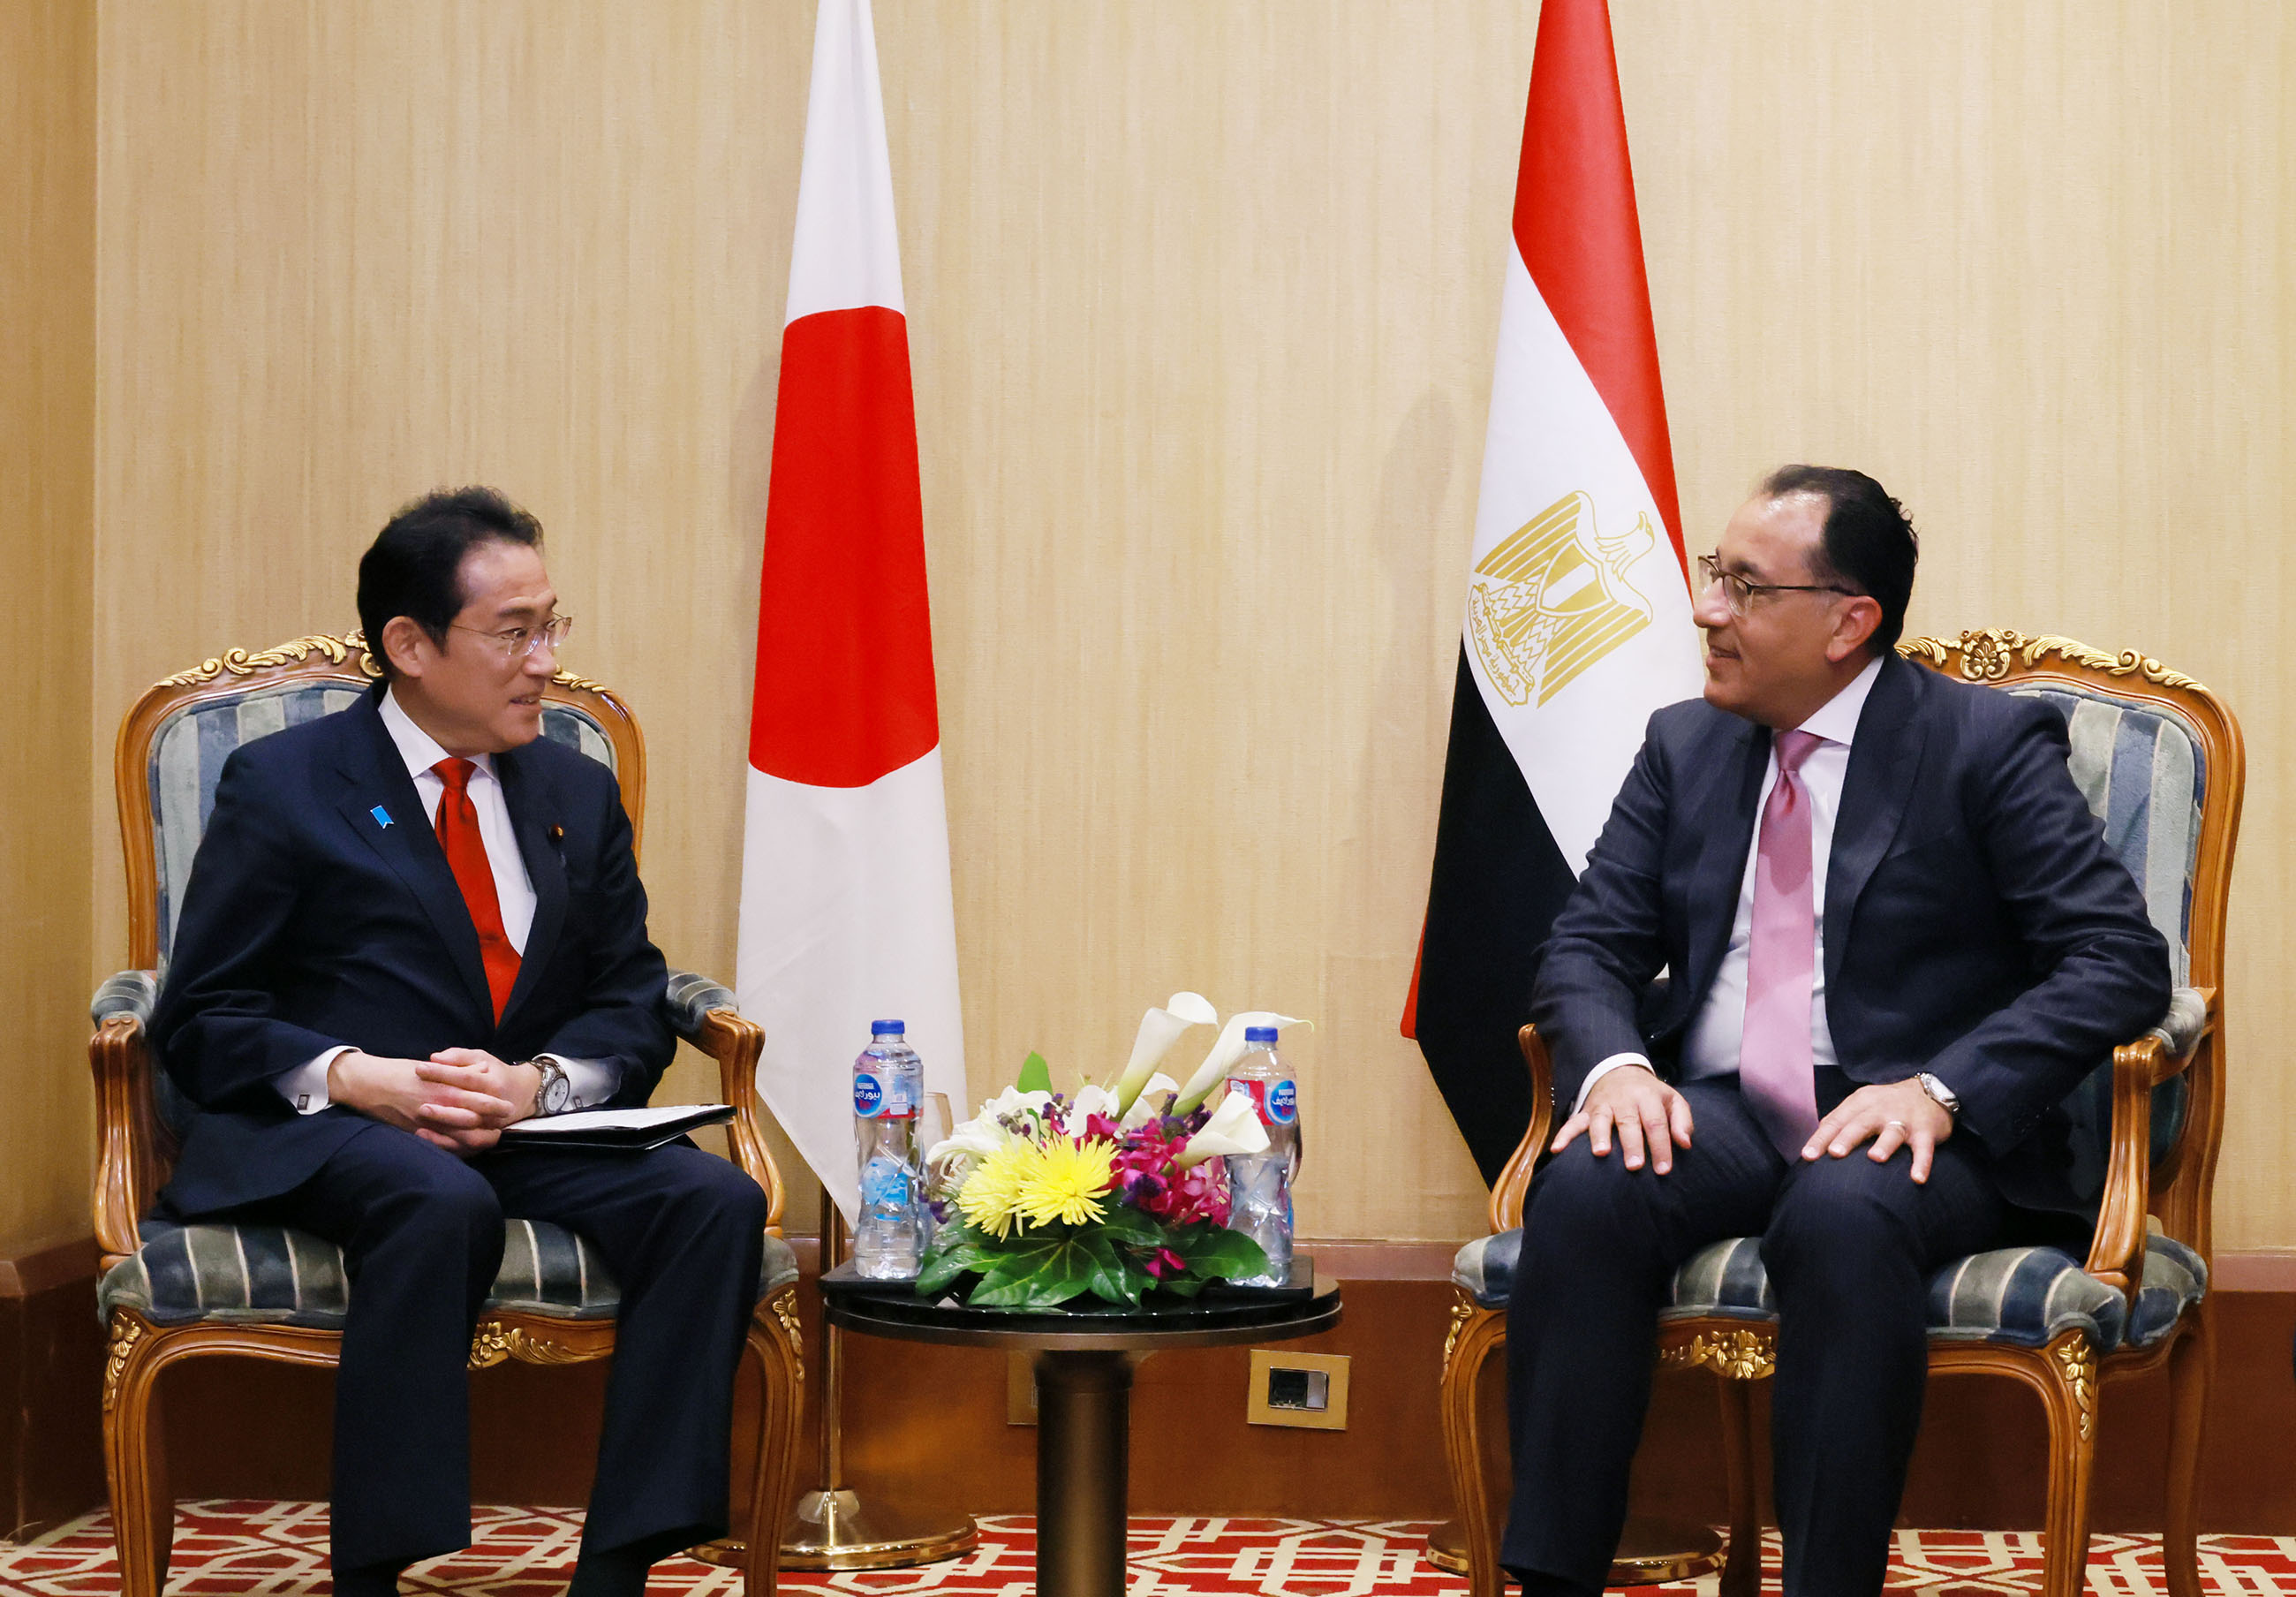 Talk between Prime Minister Kishida and Prime Minister Madbouly